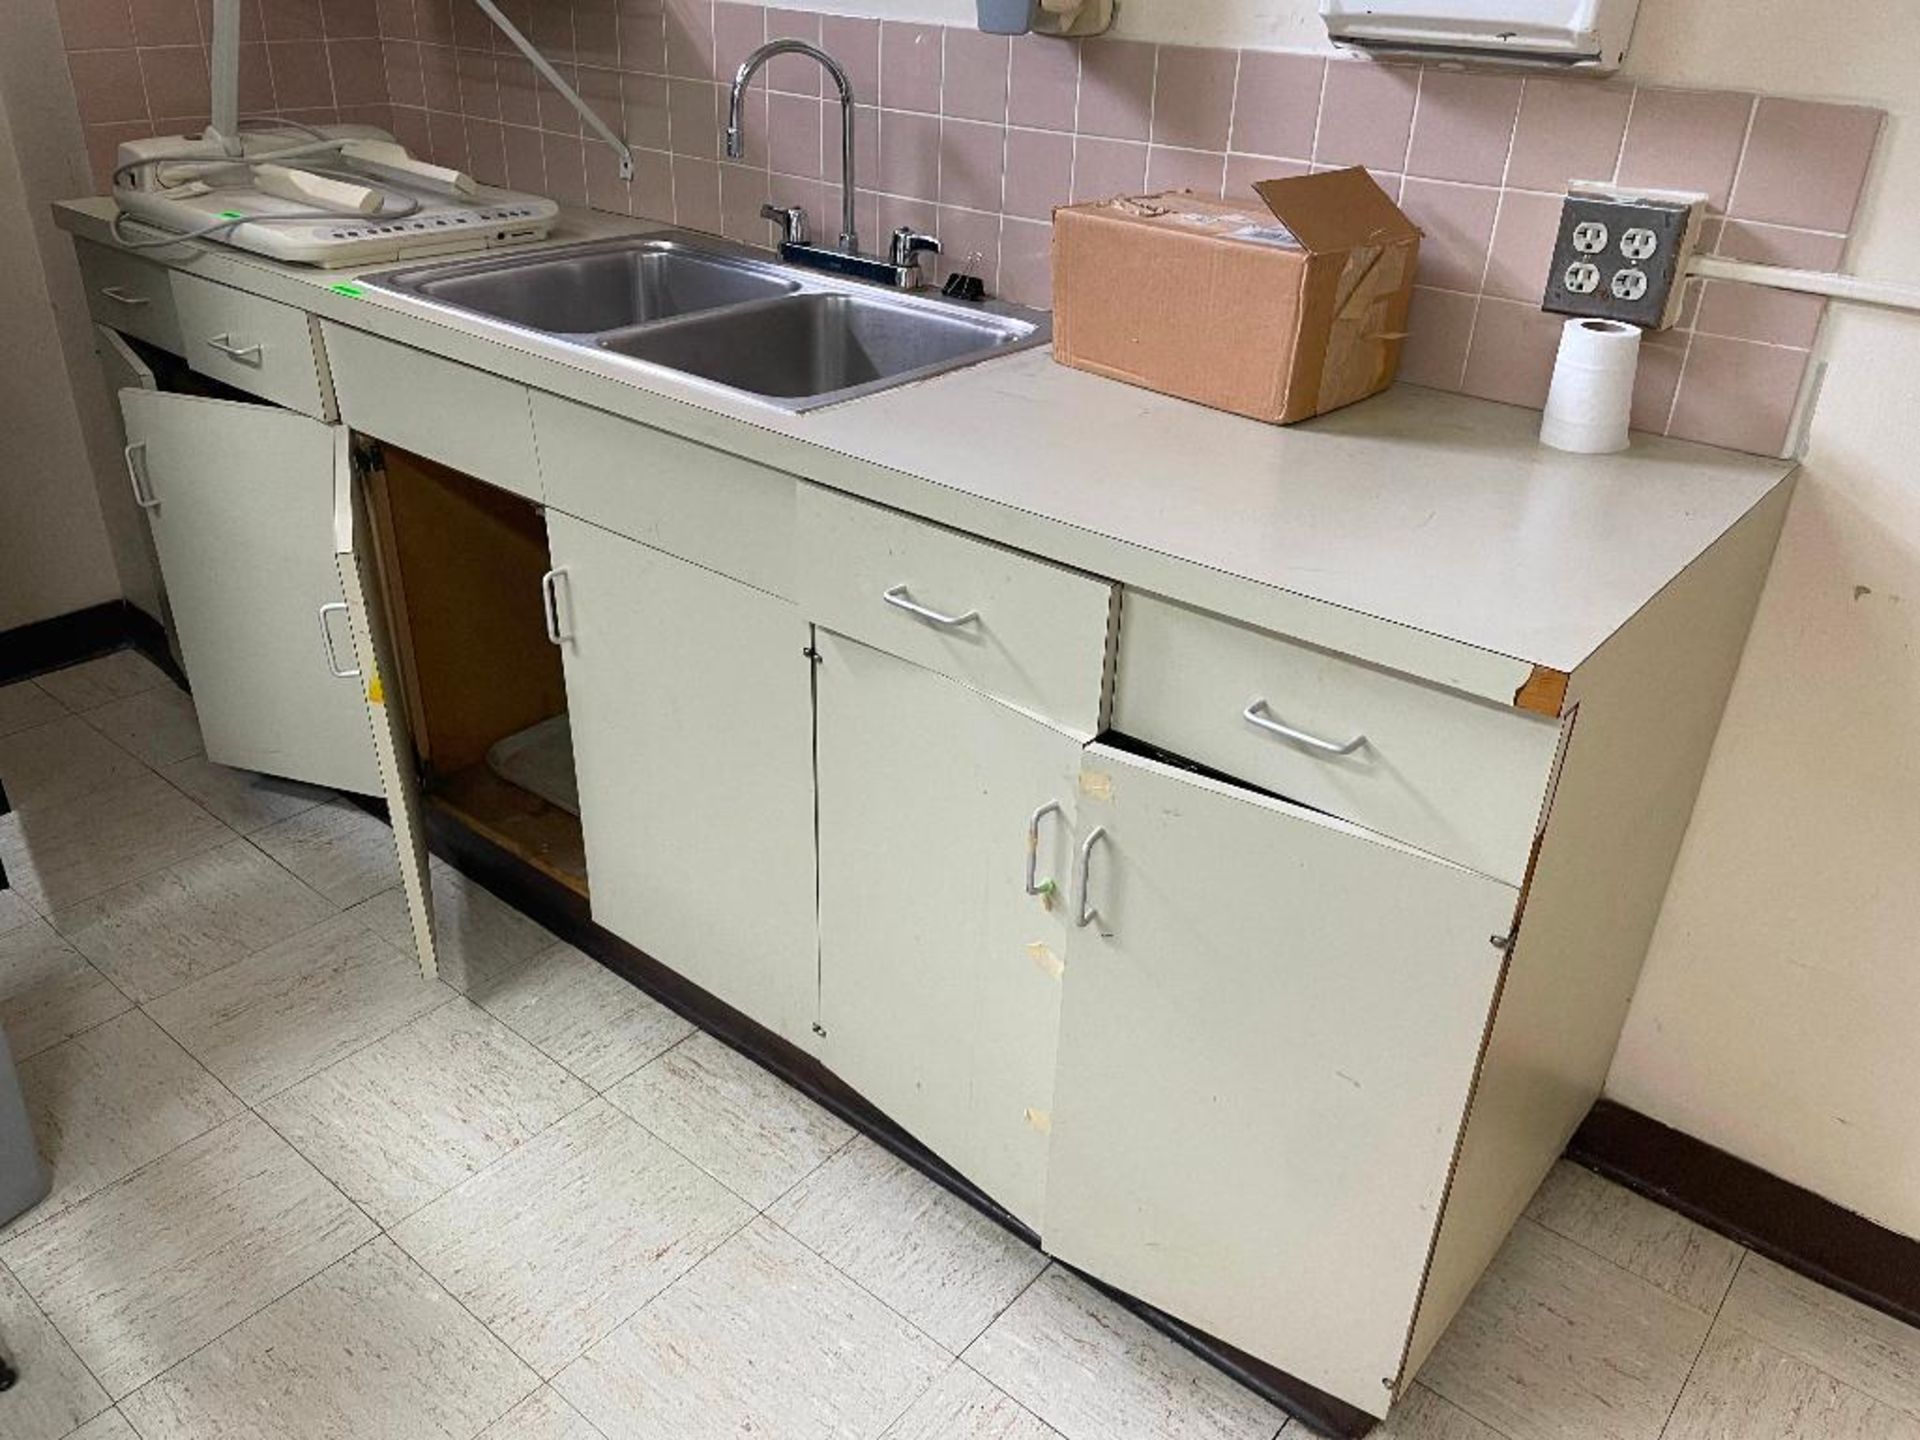 DESCRIPTION: 9' SIX DOOR COMPOSITE CABINET AND COUNTER W/ DROP IN STAINLESS SINK. LOCATION: BASEMENT - Image 2 of 3